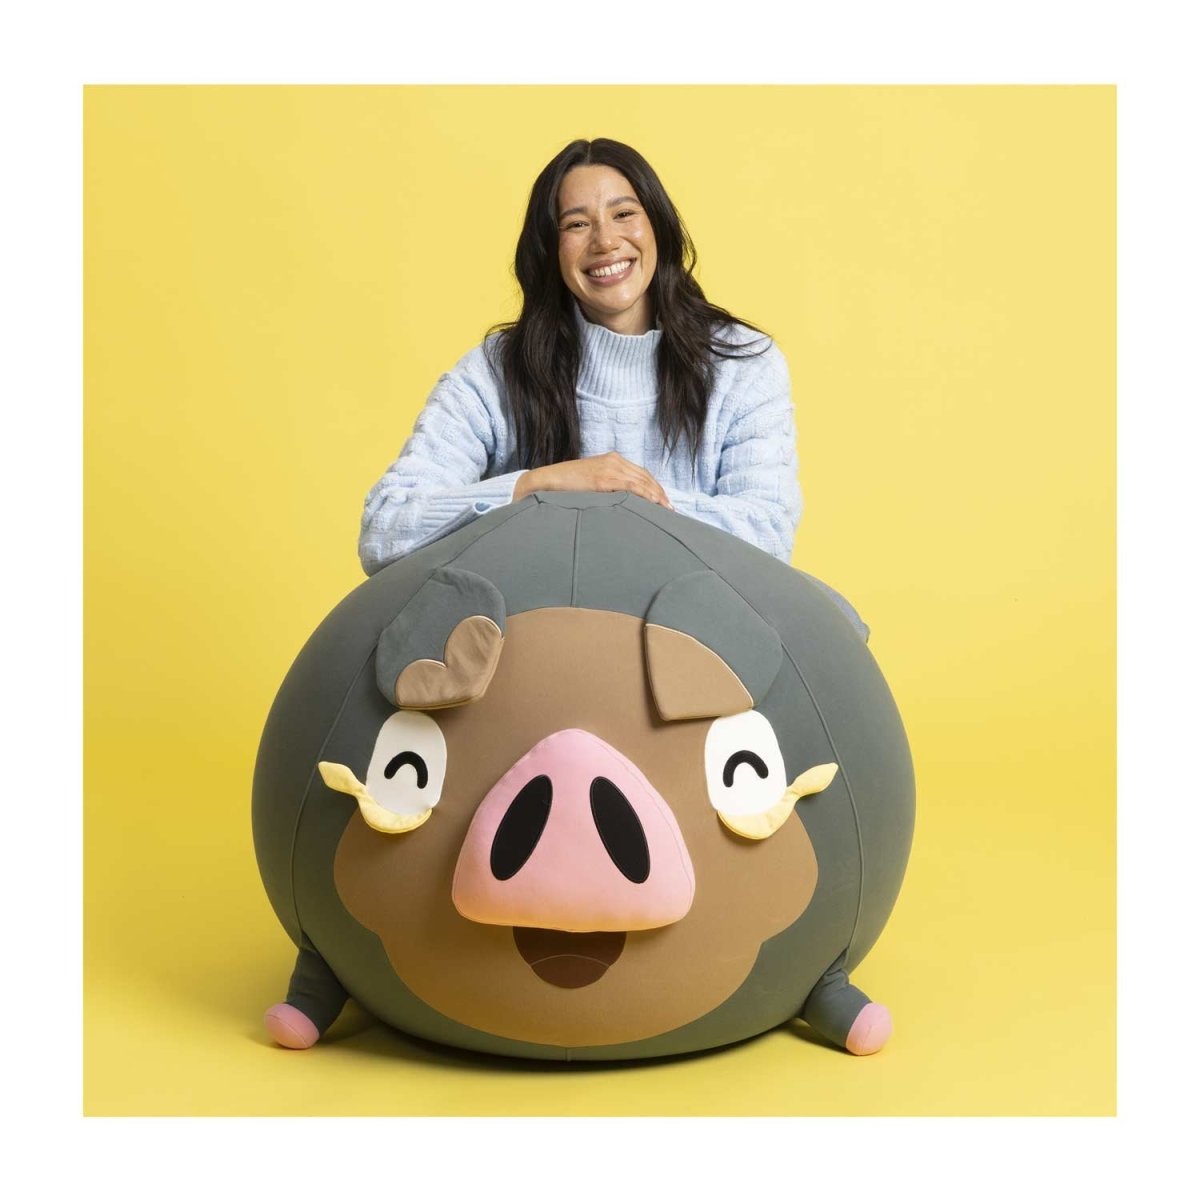 A photo of a person sitting behind a big round Lechonk beanbag. They’re smiling and there is a yellow background. The Lechonk looks really big and round.